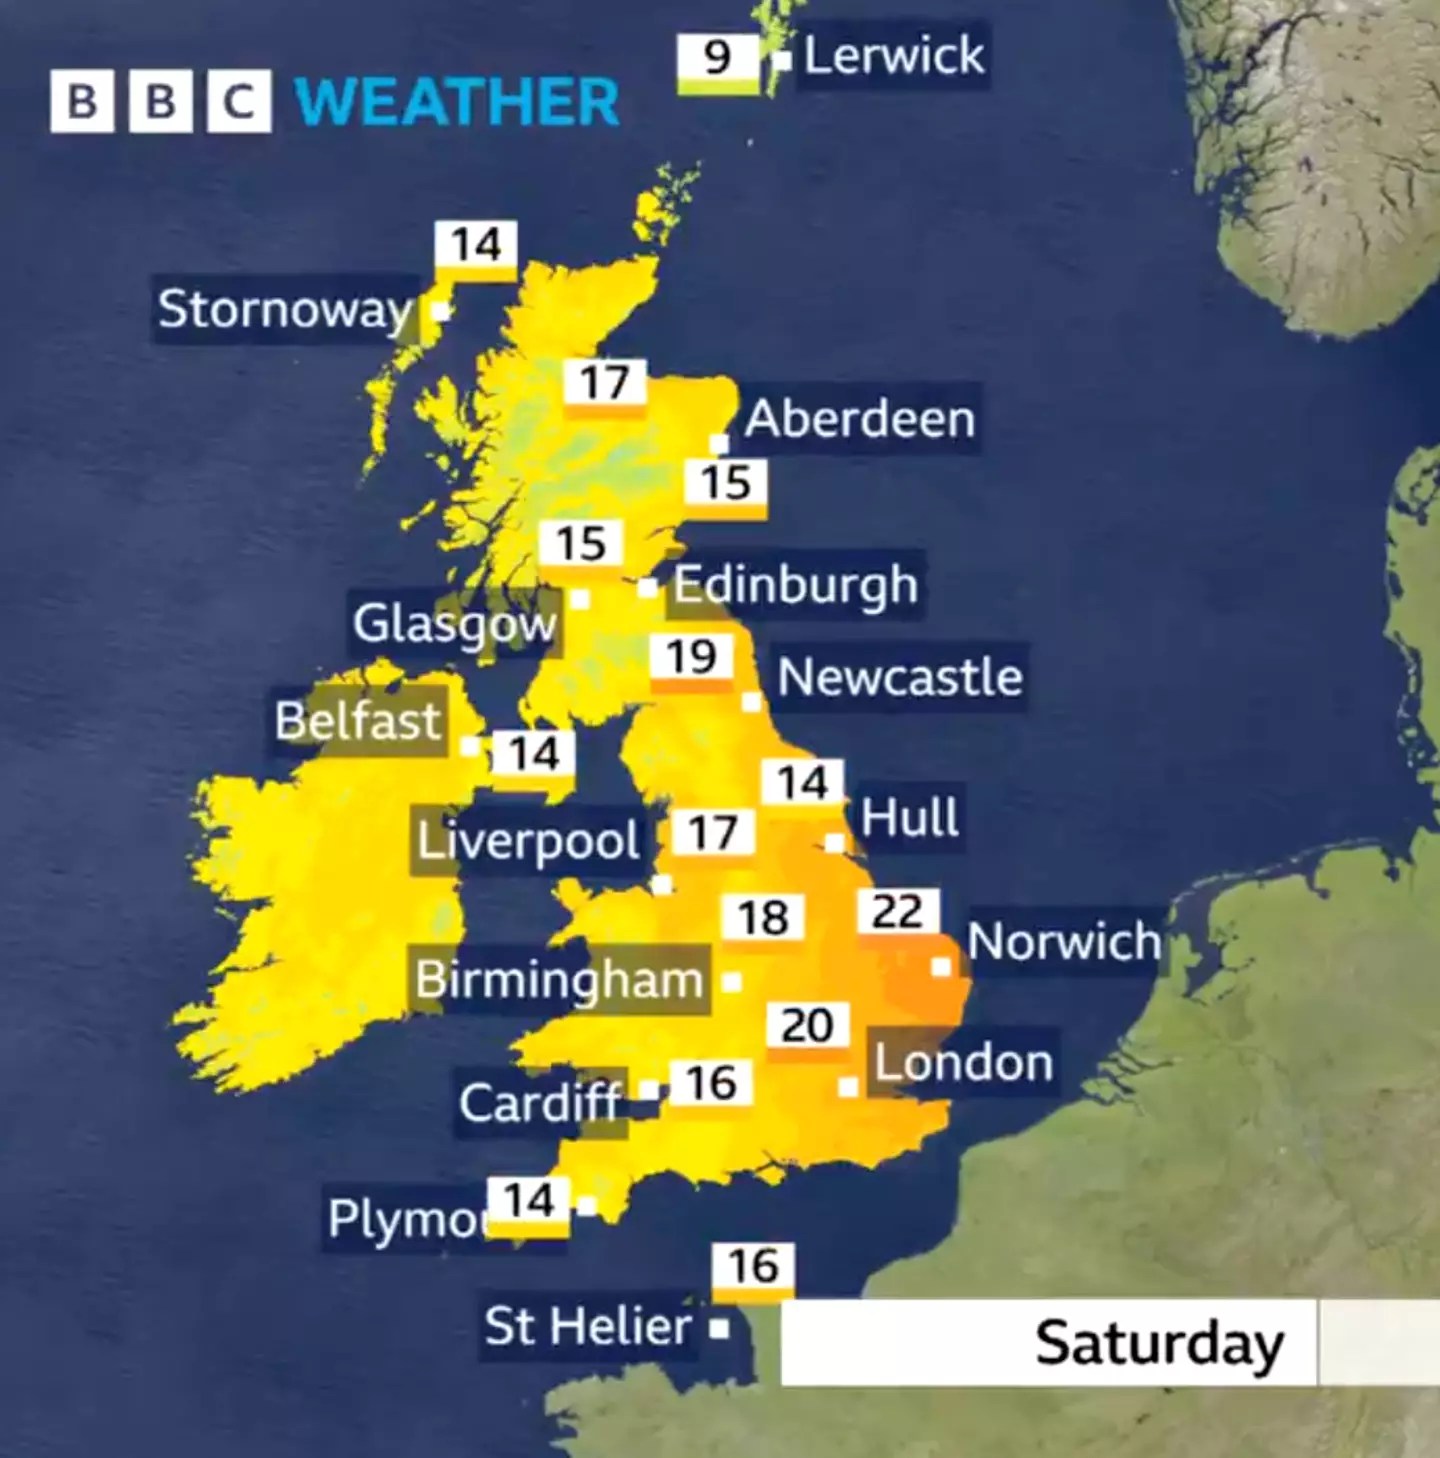 While some areas have a yellow warning for wind, others will be basking in sunshine this weekend.